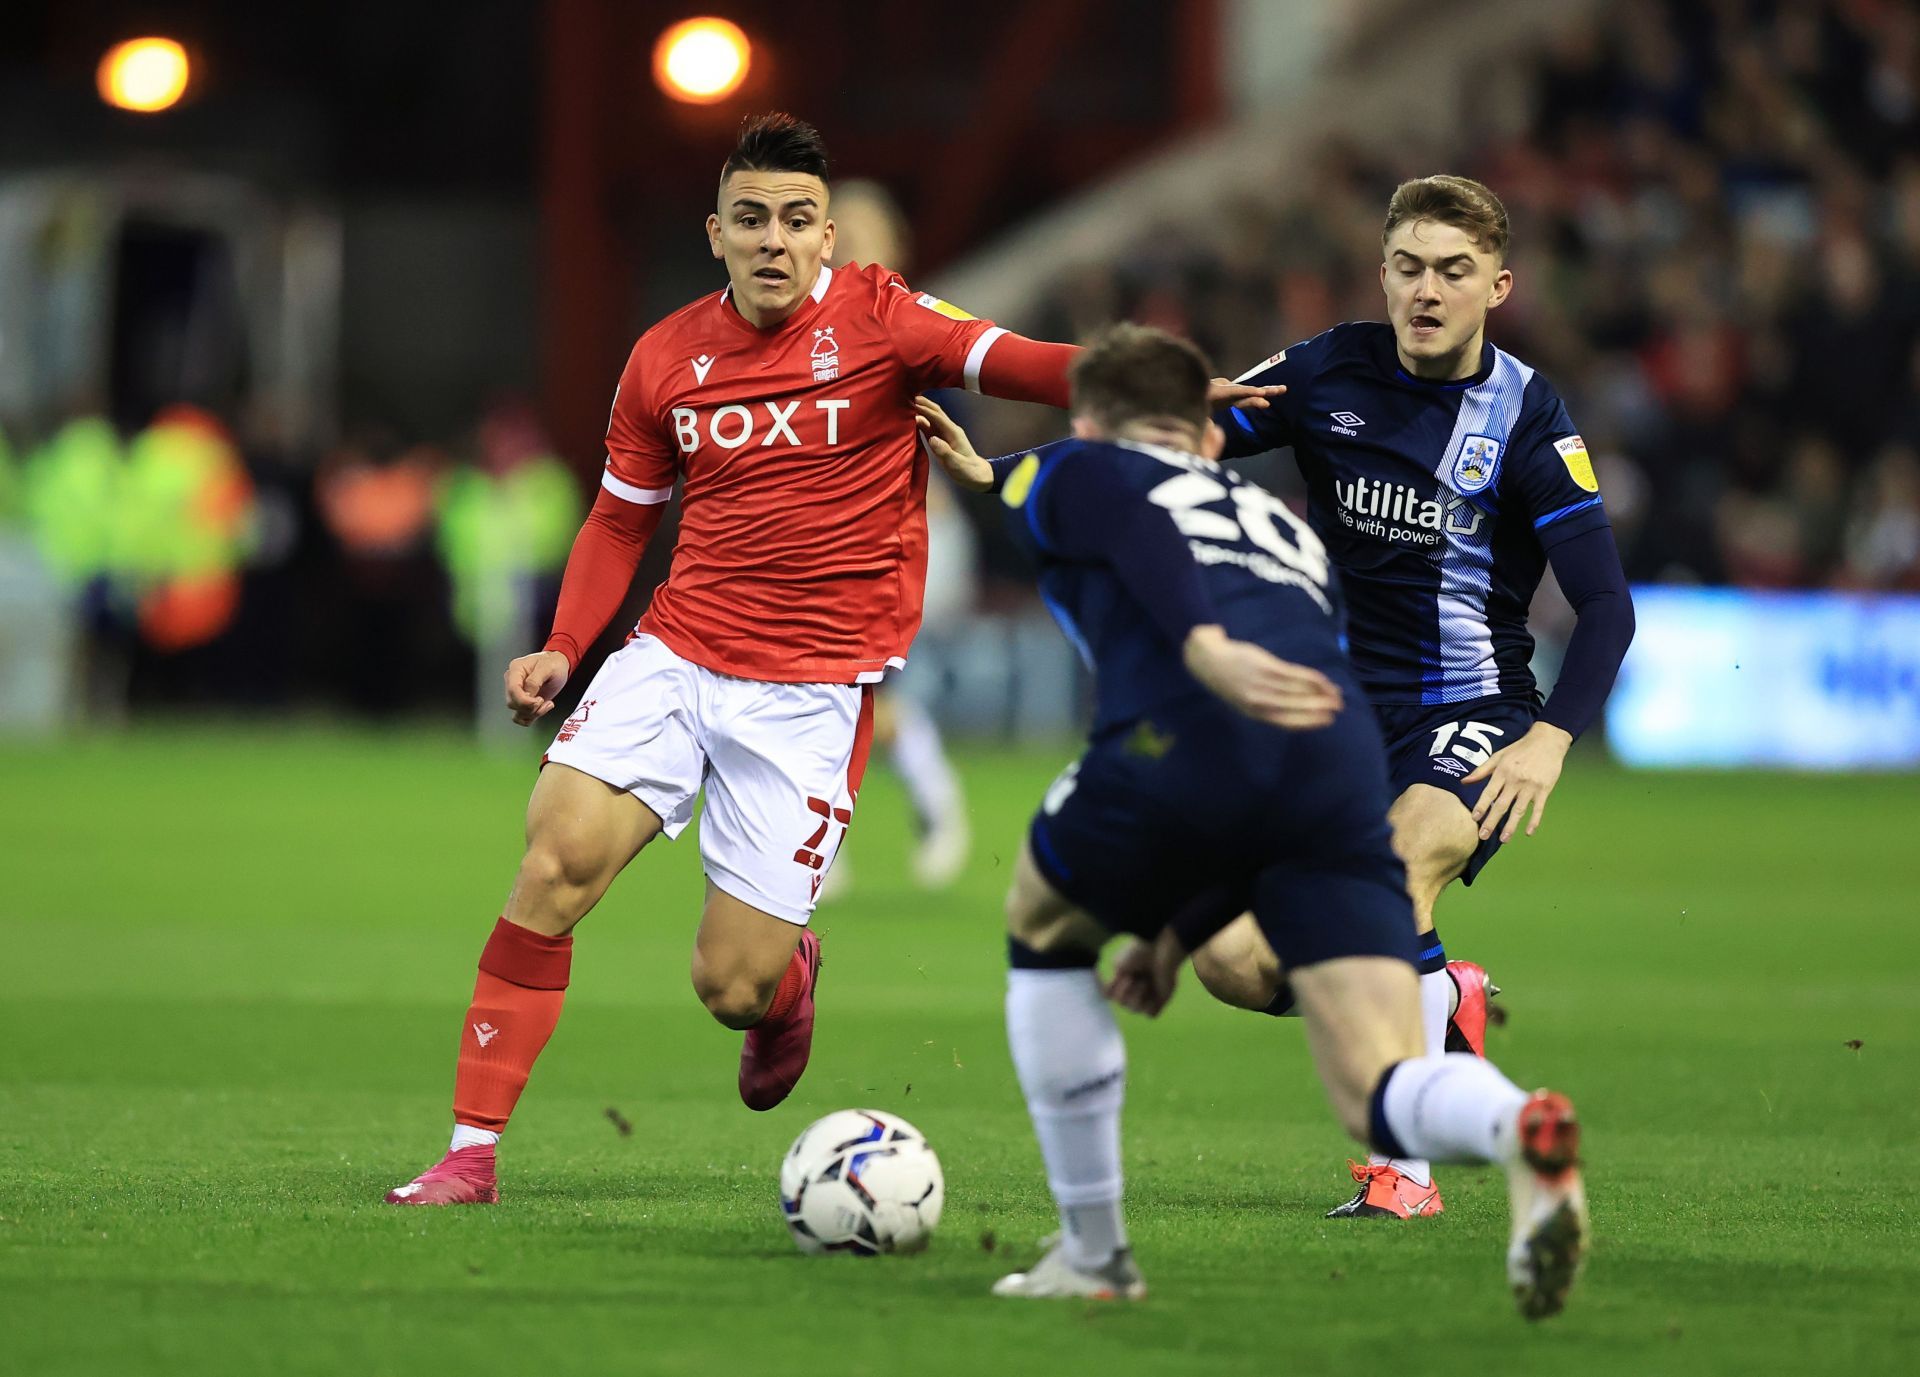 Nottingham Forest and Huddersfield Town square off on Monday